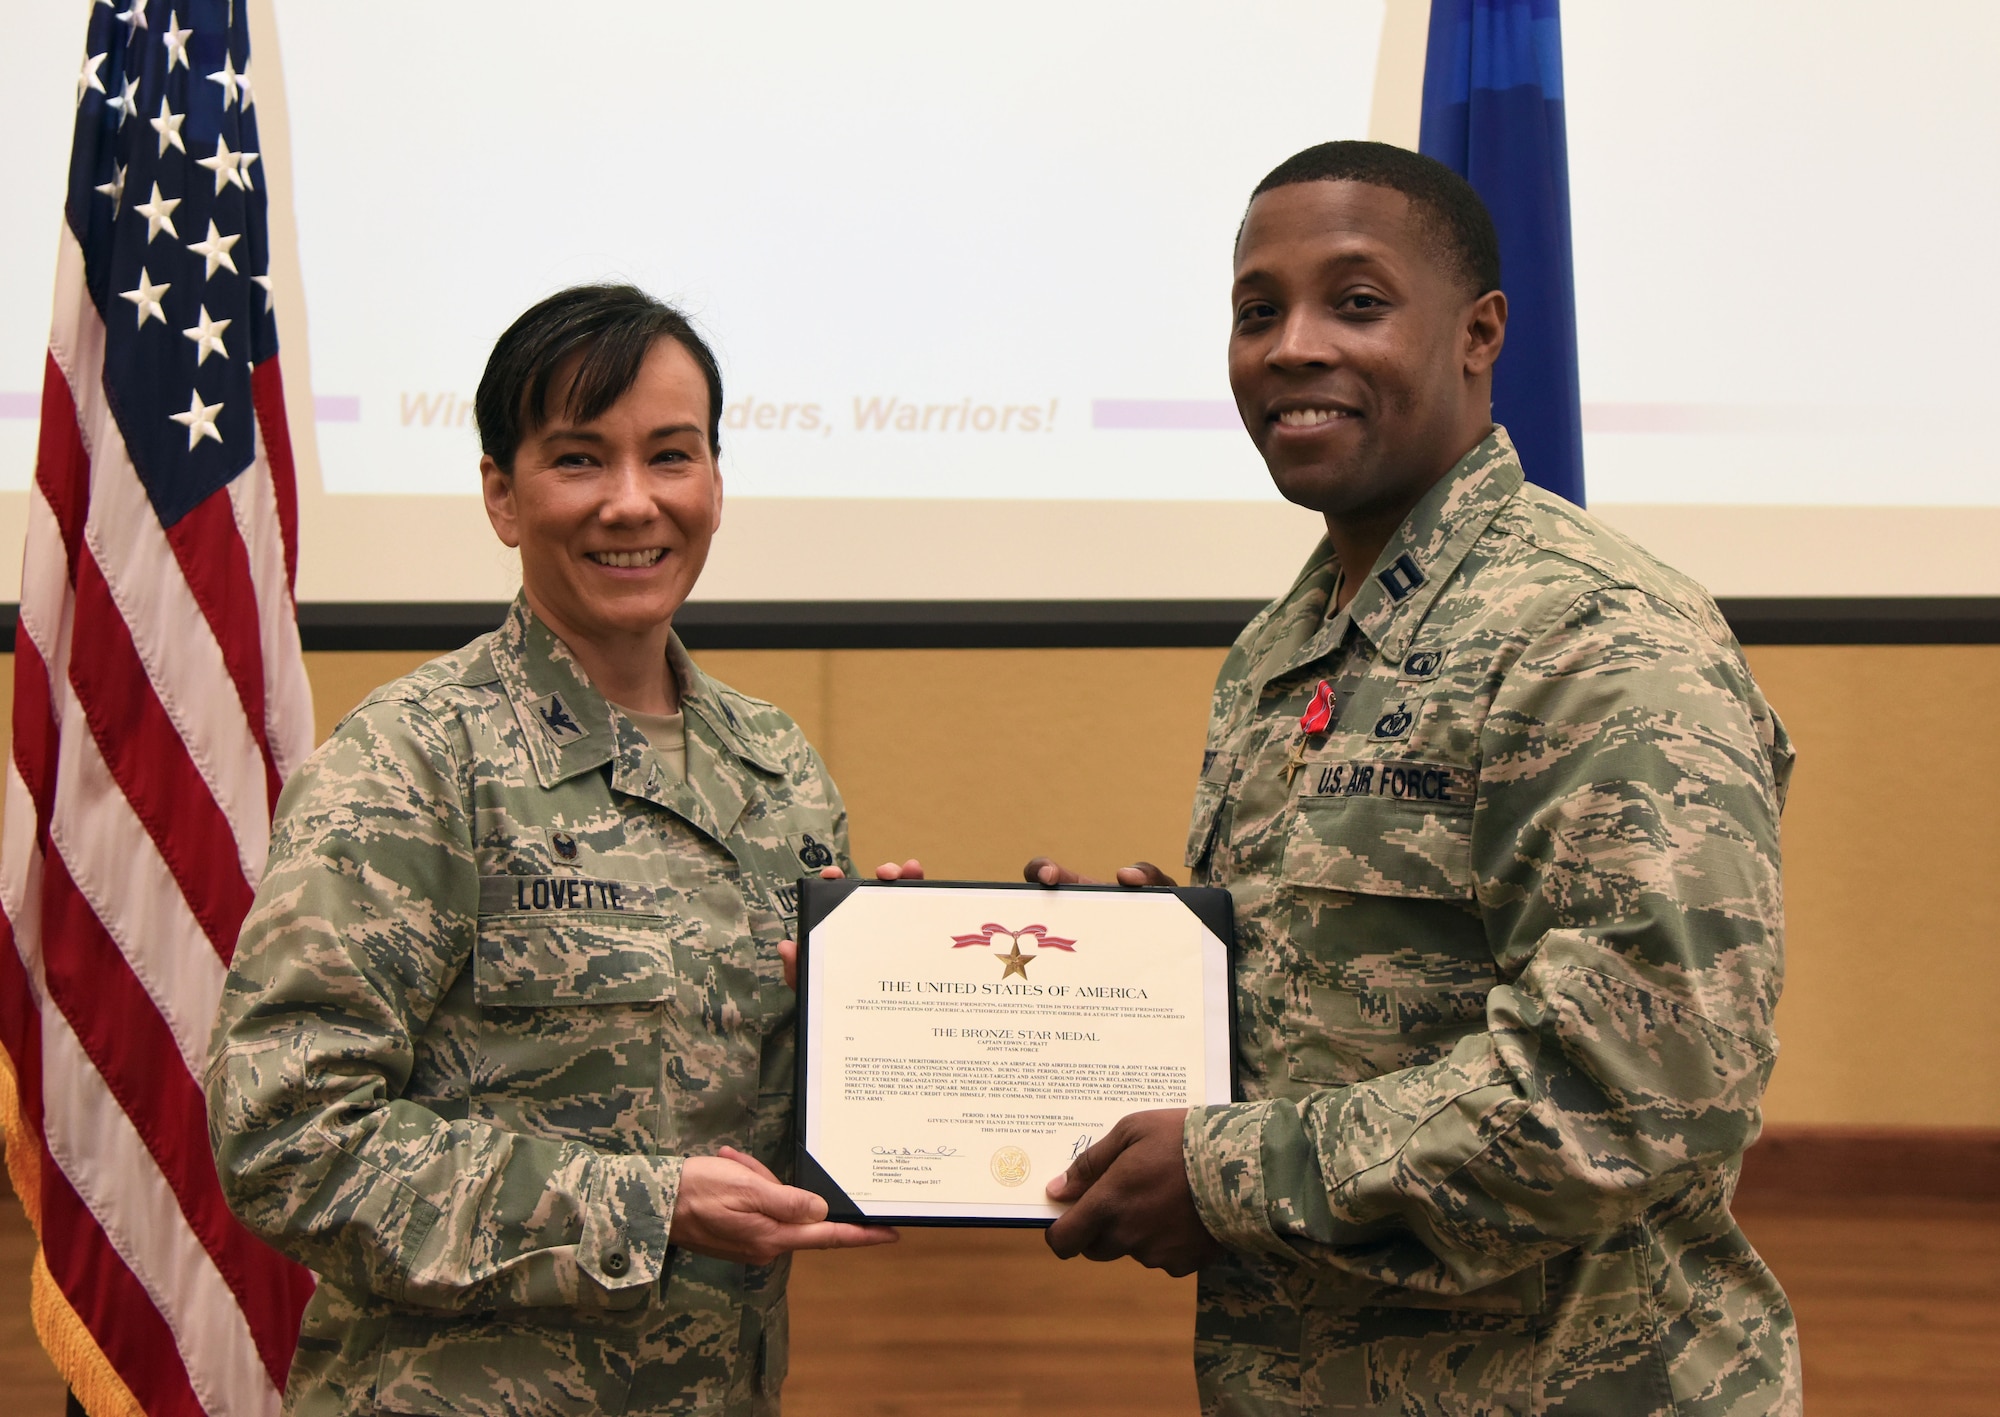 Col. Debra Lovette, 81st Training Wing commander, presents Capt. Edwin Pratt, 81st TRW executive officer, with a certificate of recognition during a commander’s all-call at the Bay Breeze Event Center March 5, 2018, on Keesler Air Force Base, Mississippi. Pratt was presented with a Bronze Star for meritorious achievement May 2016, through Nov. 2016. (U.S. Air Force photo by Kemberly Groue)